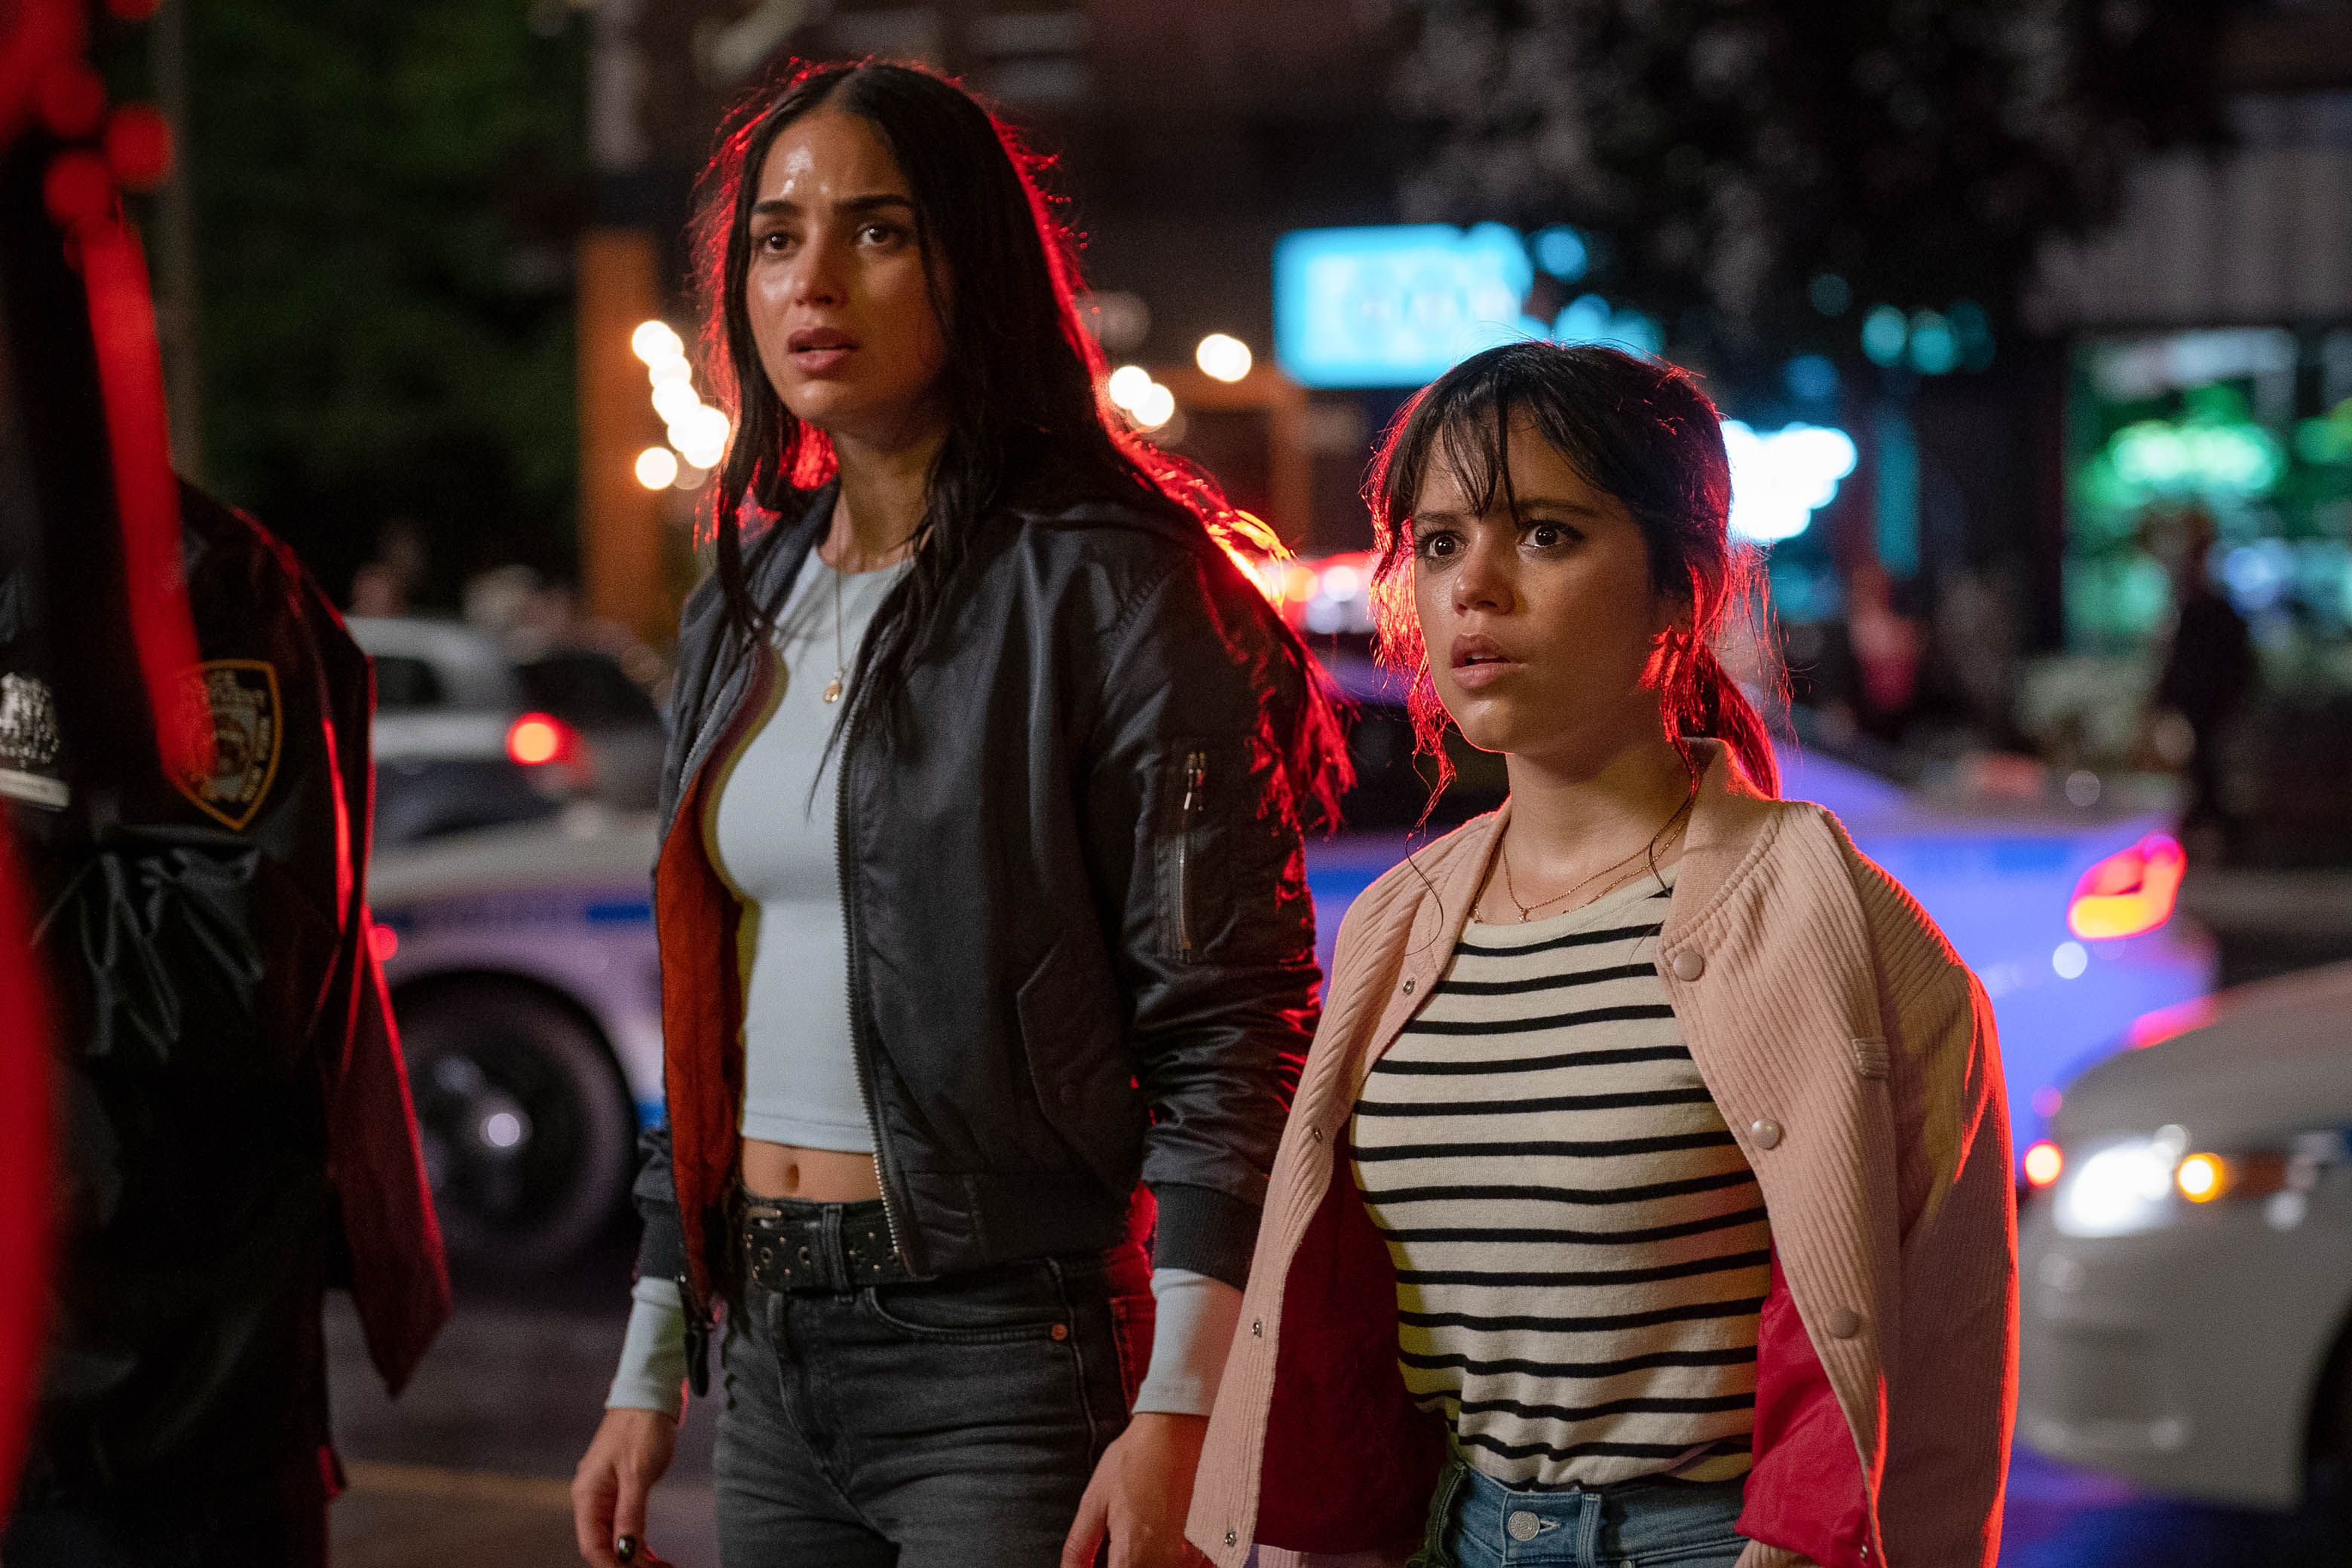 Melissa Barrera (left) and Jenna Ortega (right) star in Paramount Pictures and Spyglass Media Group's "Scream VI." © 2022 Paramount Pictures. 